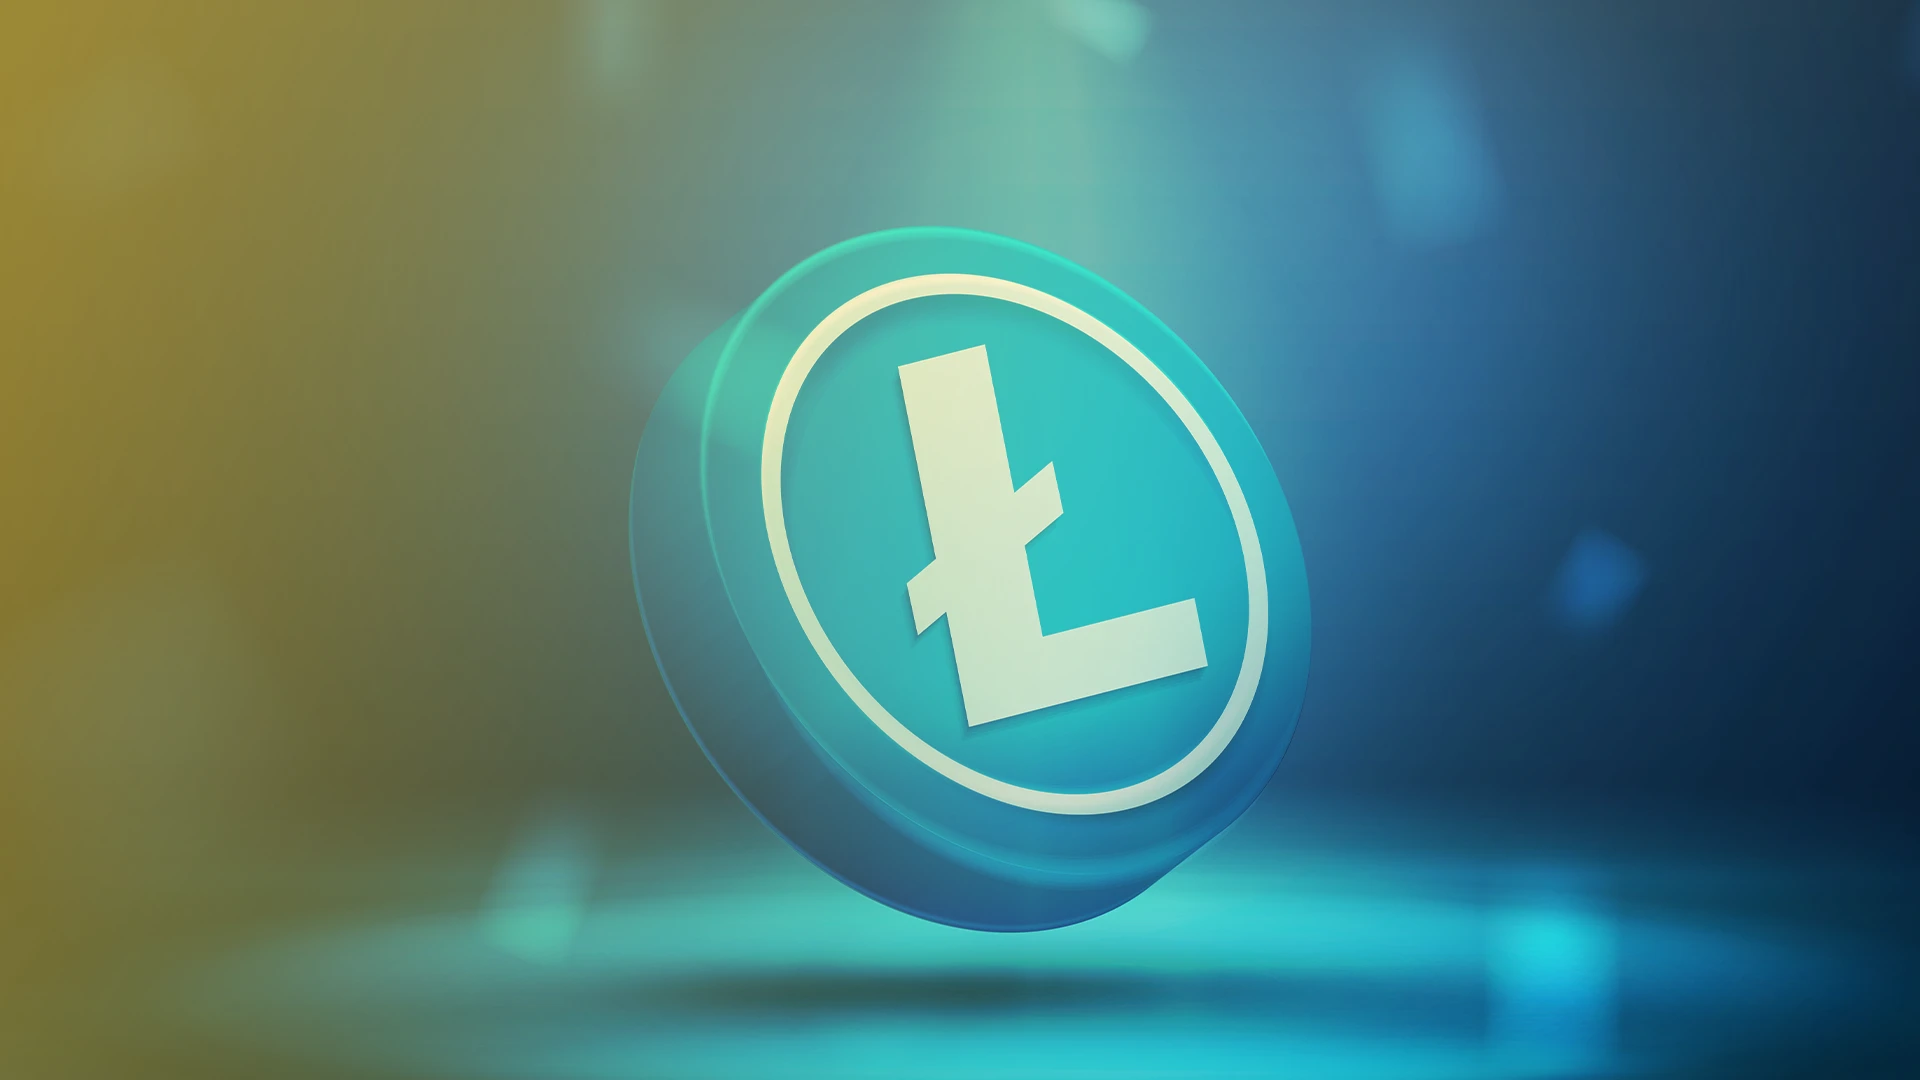 How to Mine Litecoin - A Step by Step Guide to Mining LTC